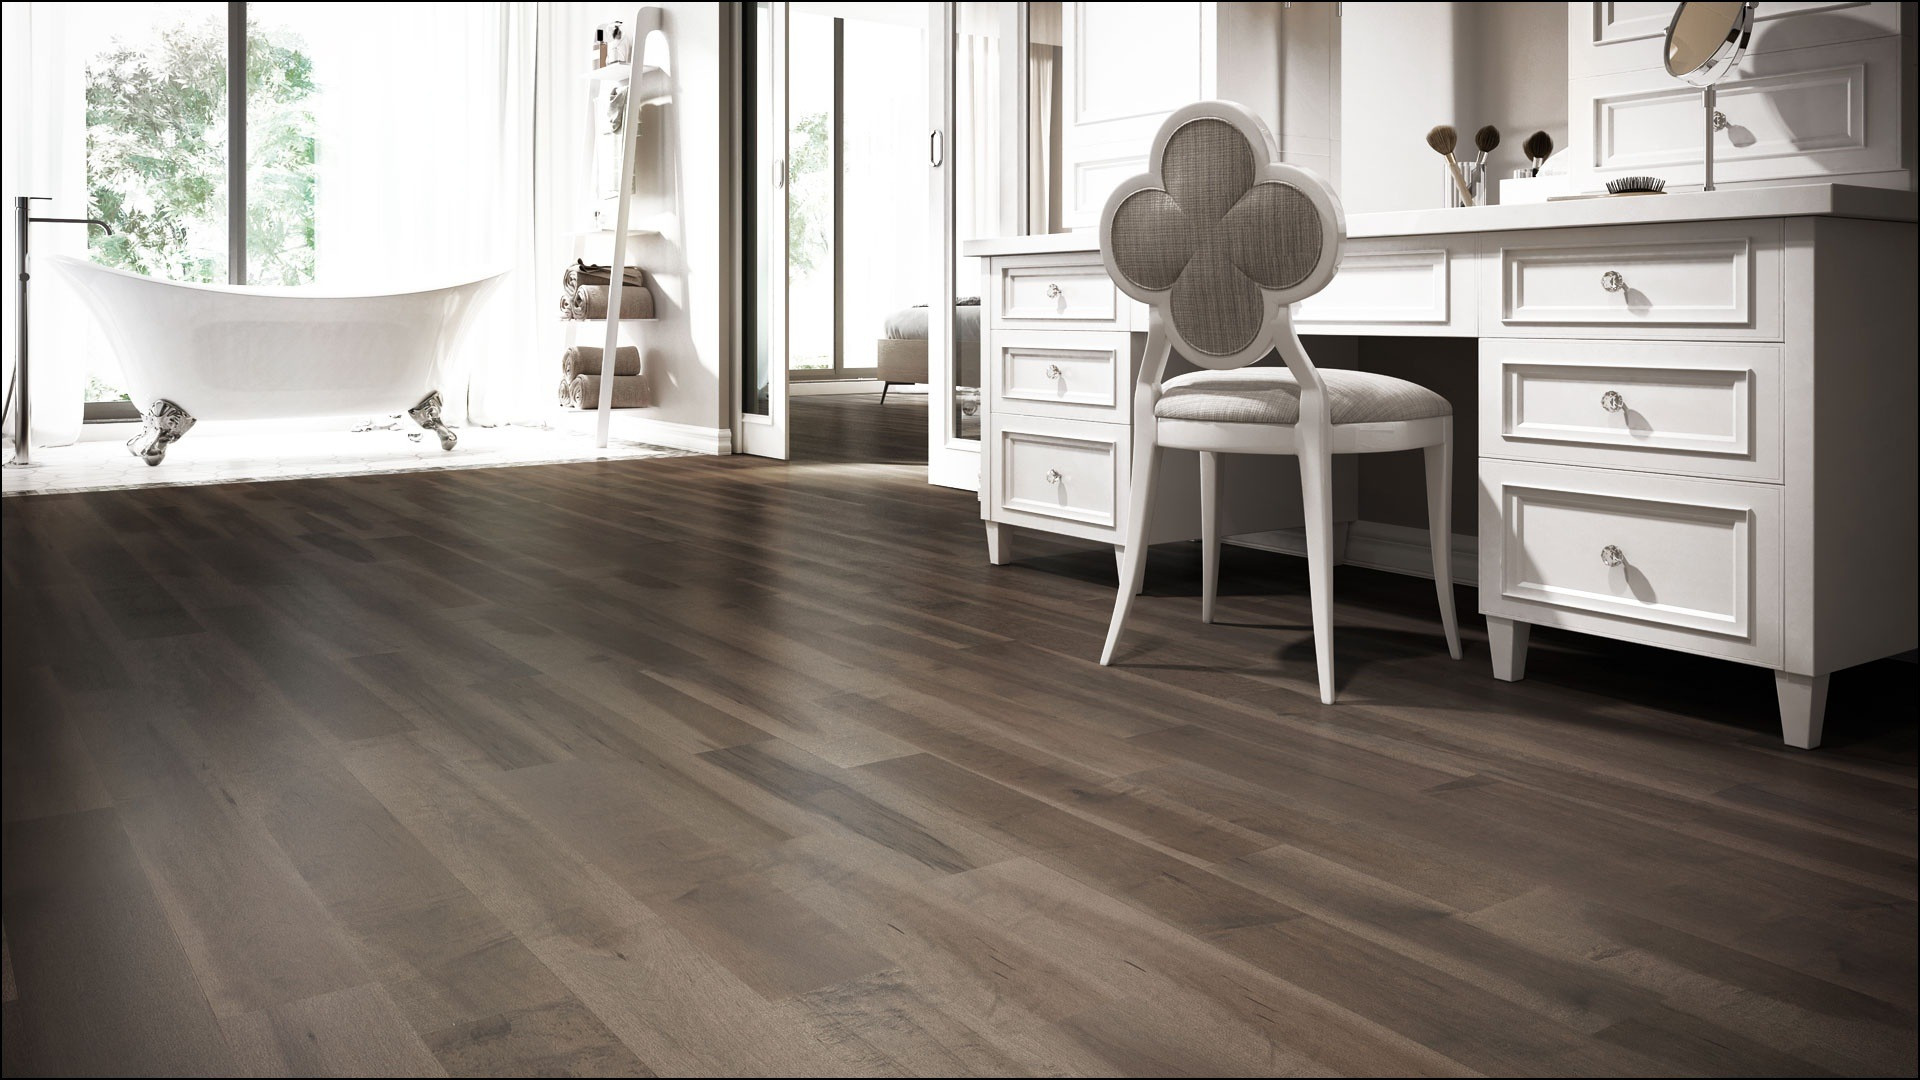 23 Stylish Hardwood Flooring 1000 Sq Ft 2024 free download hardwood flooring 1000 sq ft of hardwood flooring suppliers france flooring ideas for hardwood flooring pictures in homes images black and white laminate flooring beautiful splendid exterior